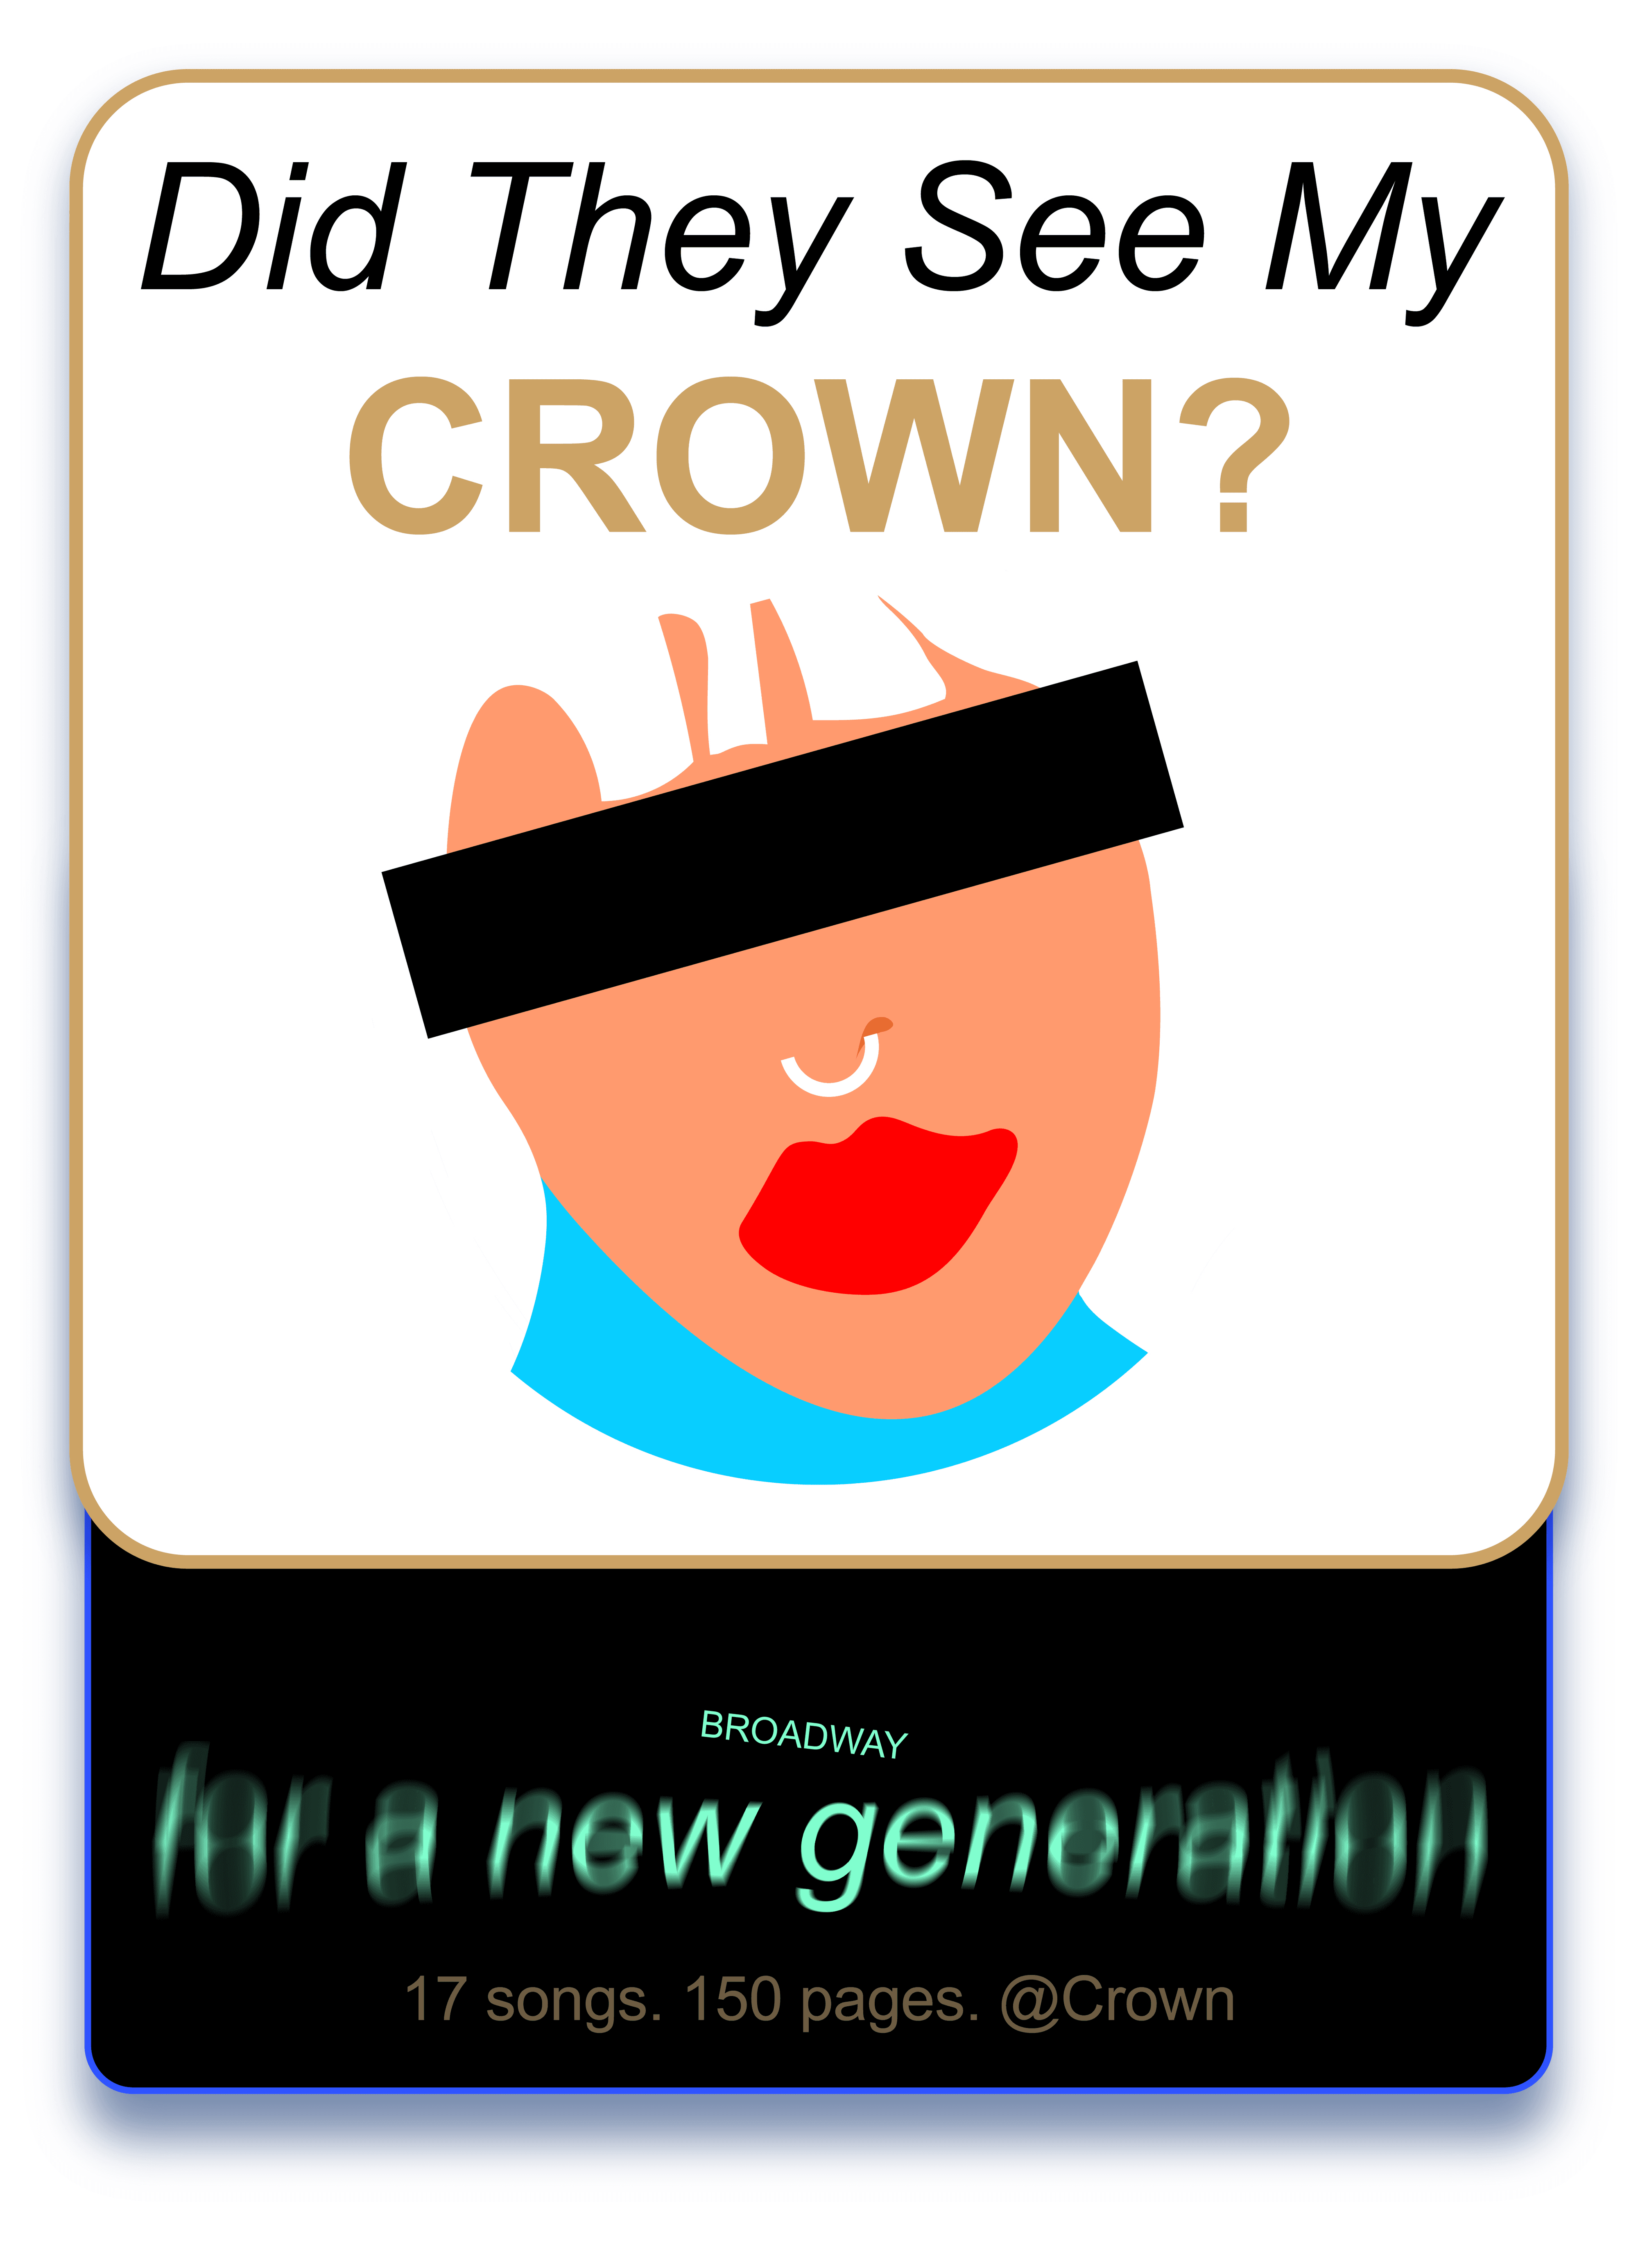 The world’s most expensive NFT | Did They See My Crown? | @Crown